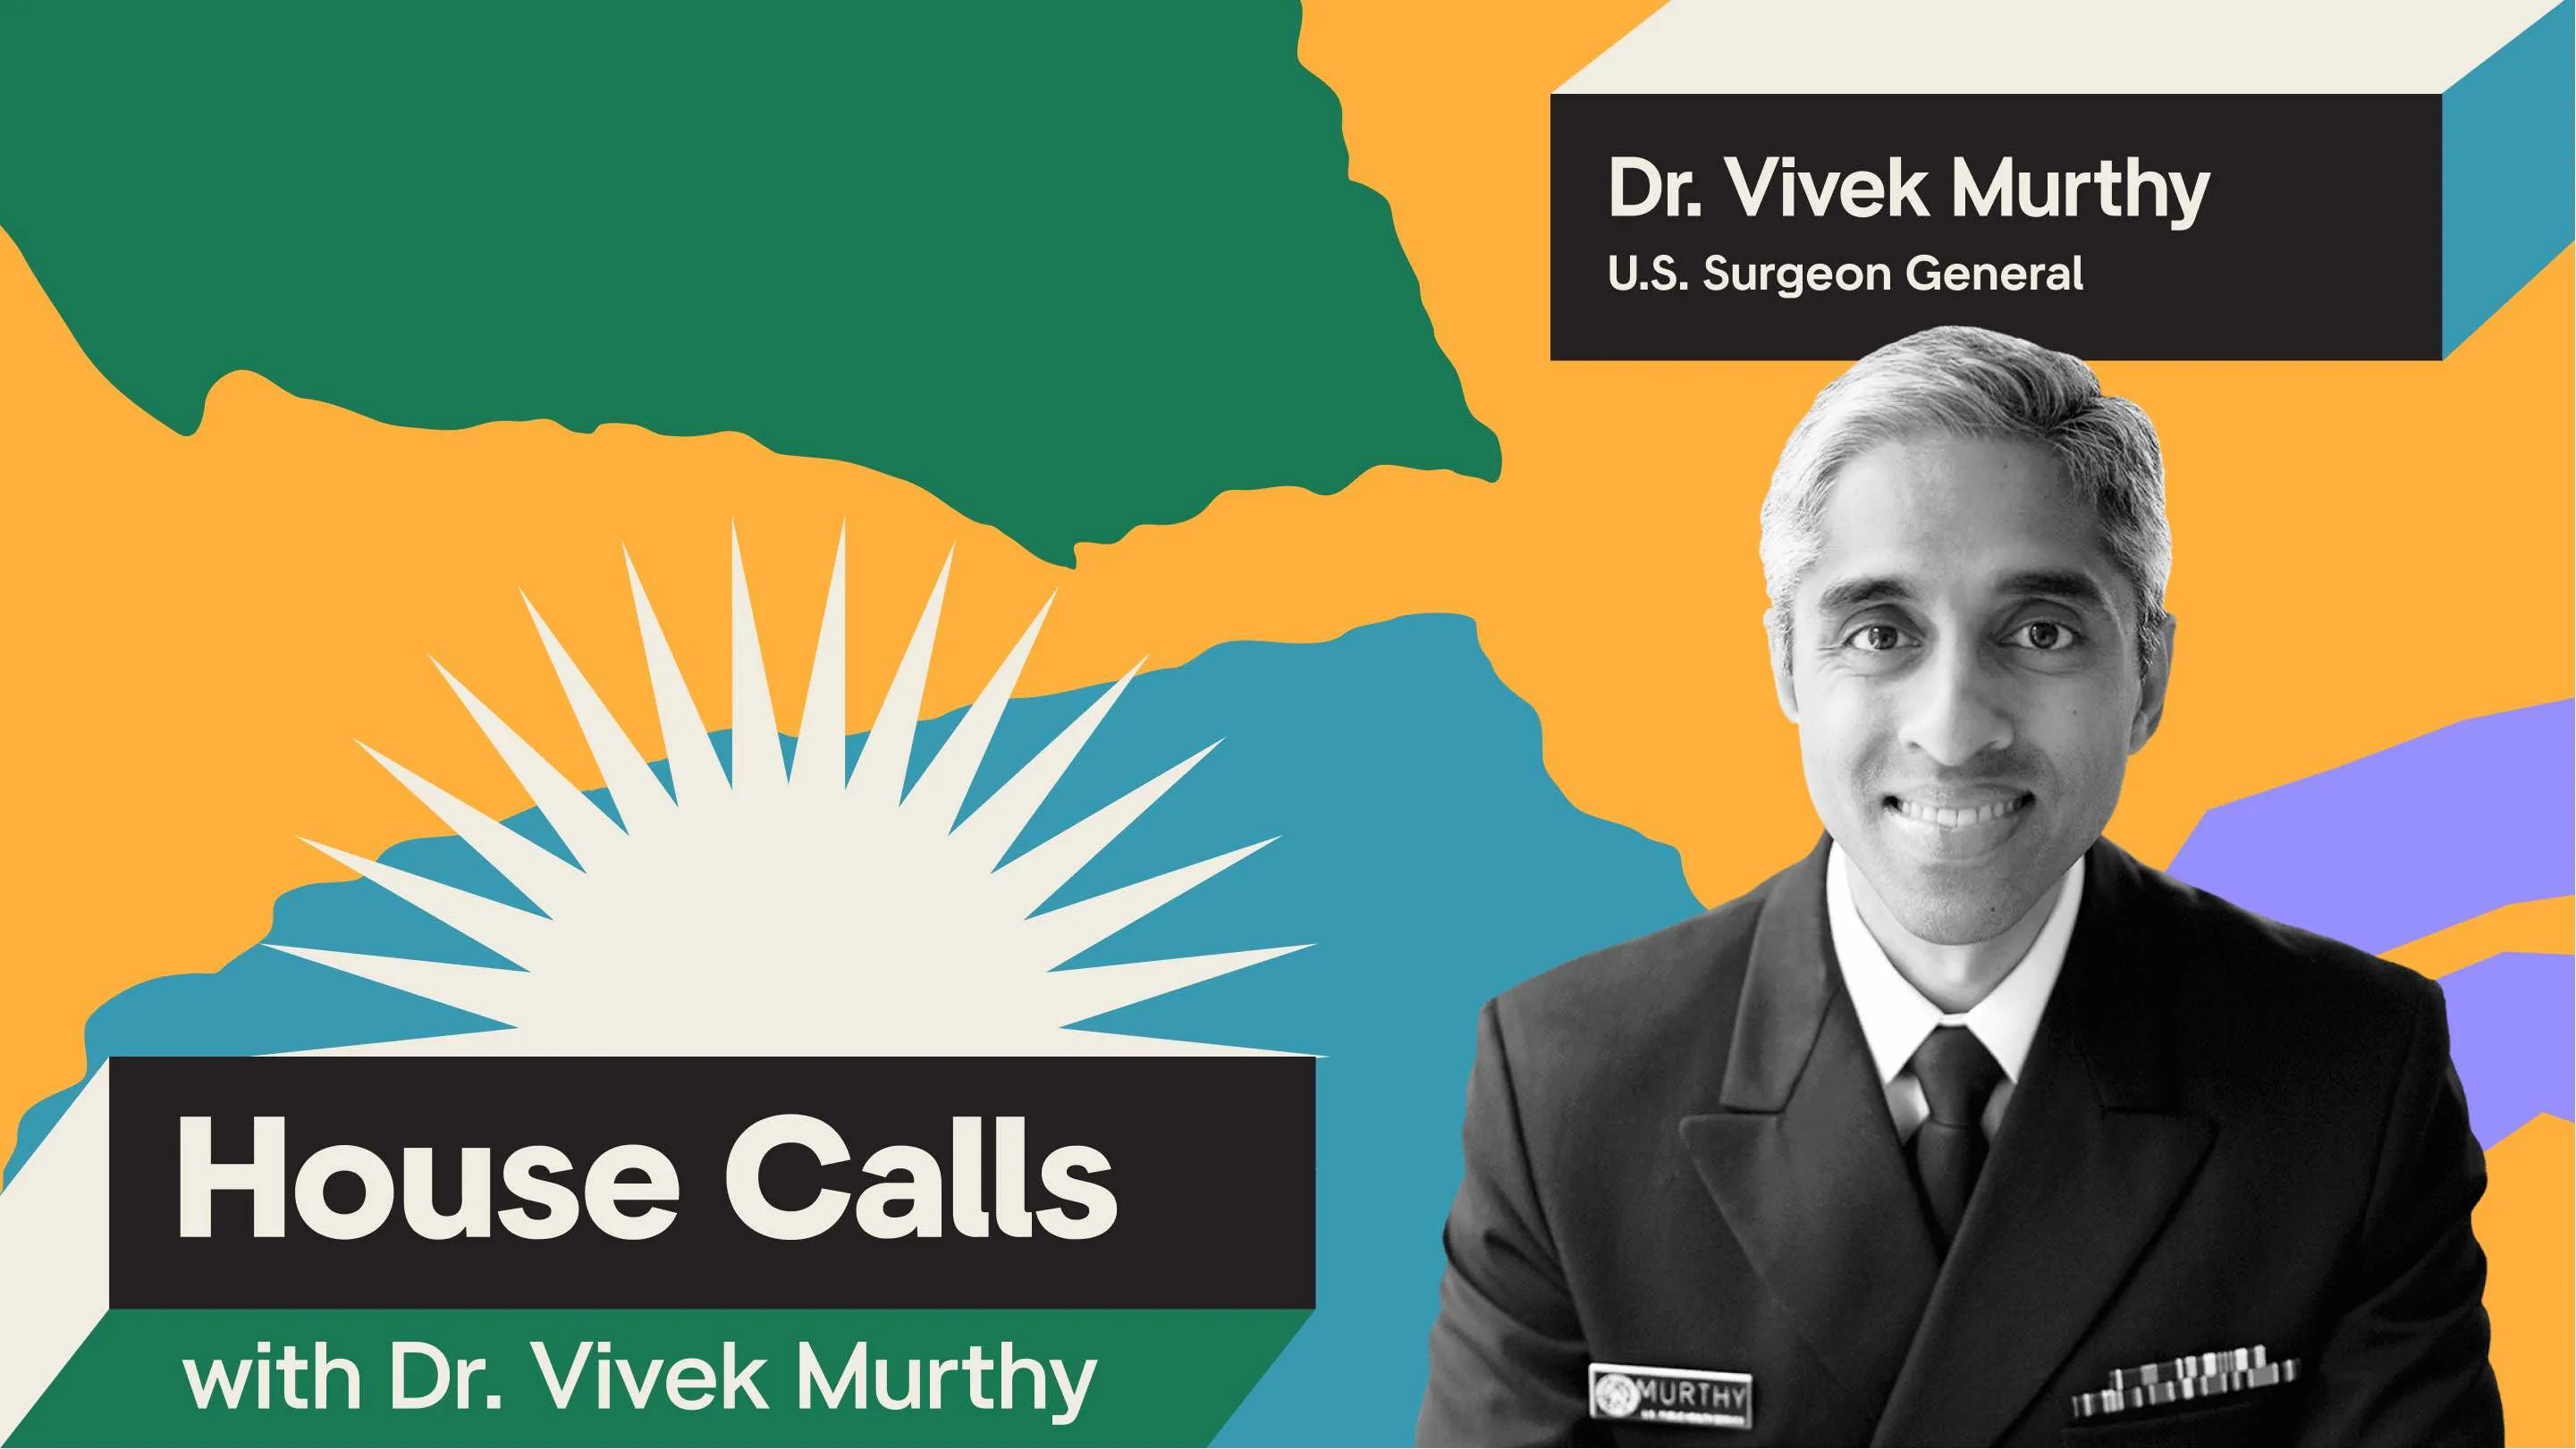 Black and white portrait of Surgeon General Vivek Murthy with a colorful background.